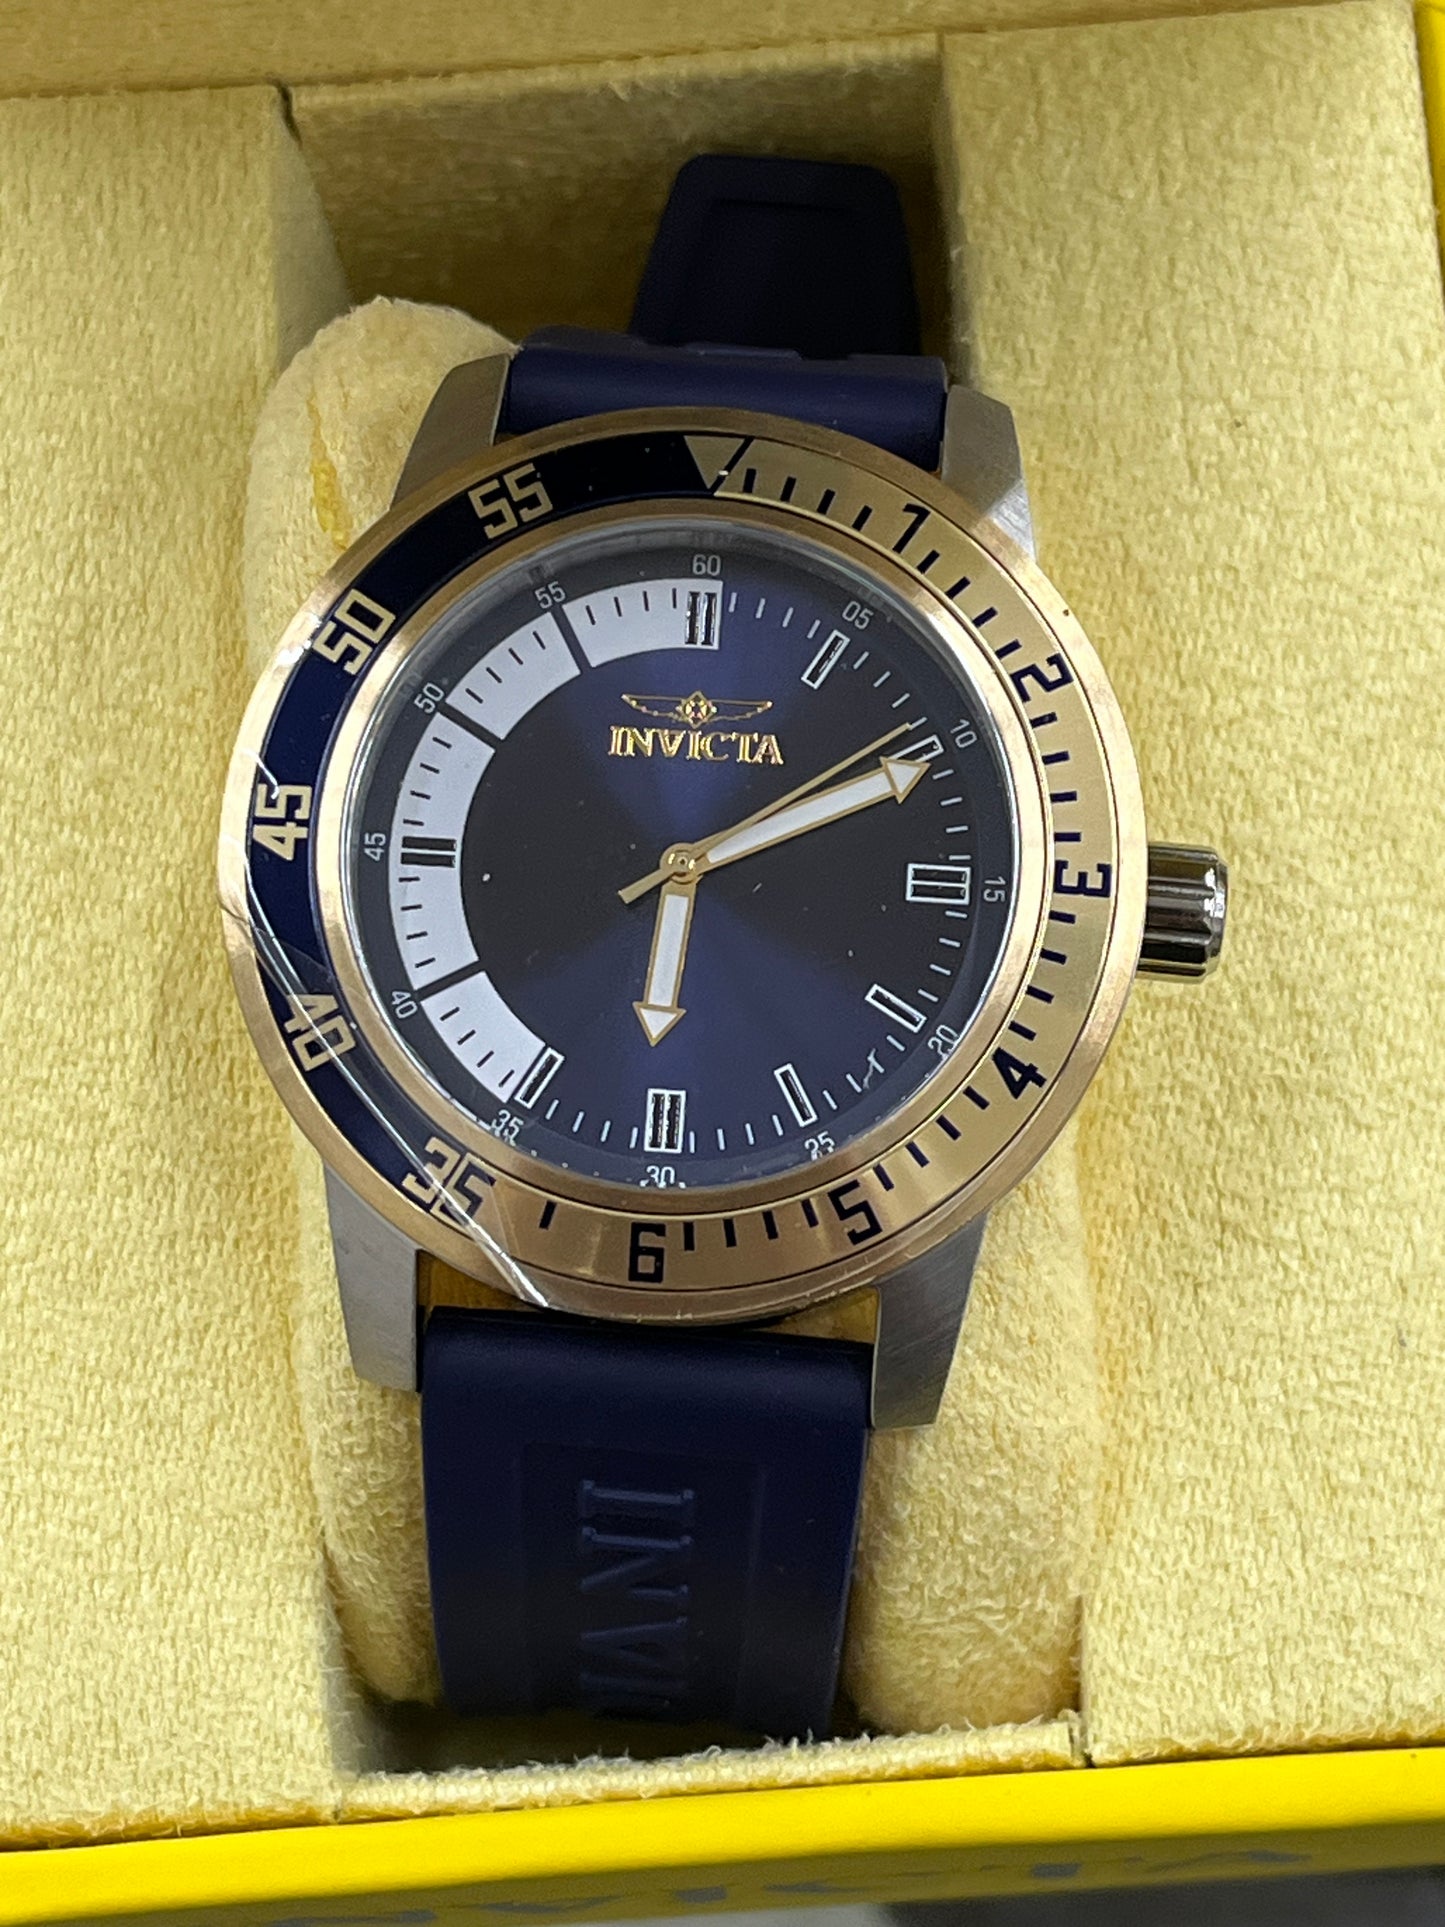 I26) Invicta Specialty Men's Watch - 45mm, Blue (12847)